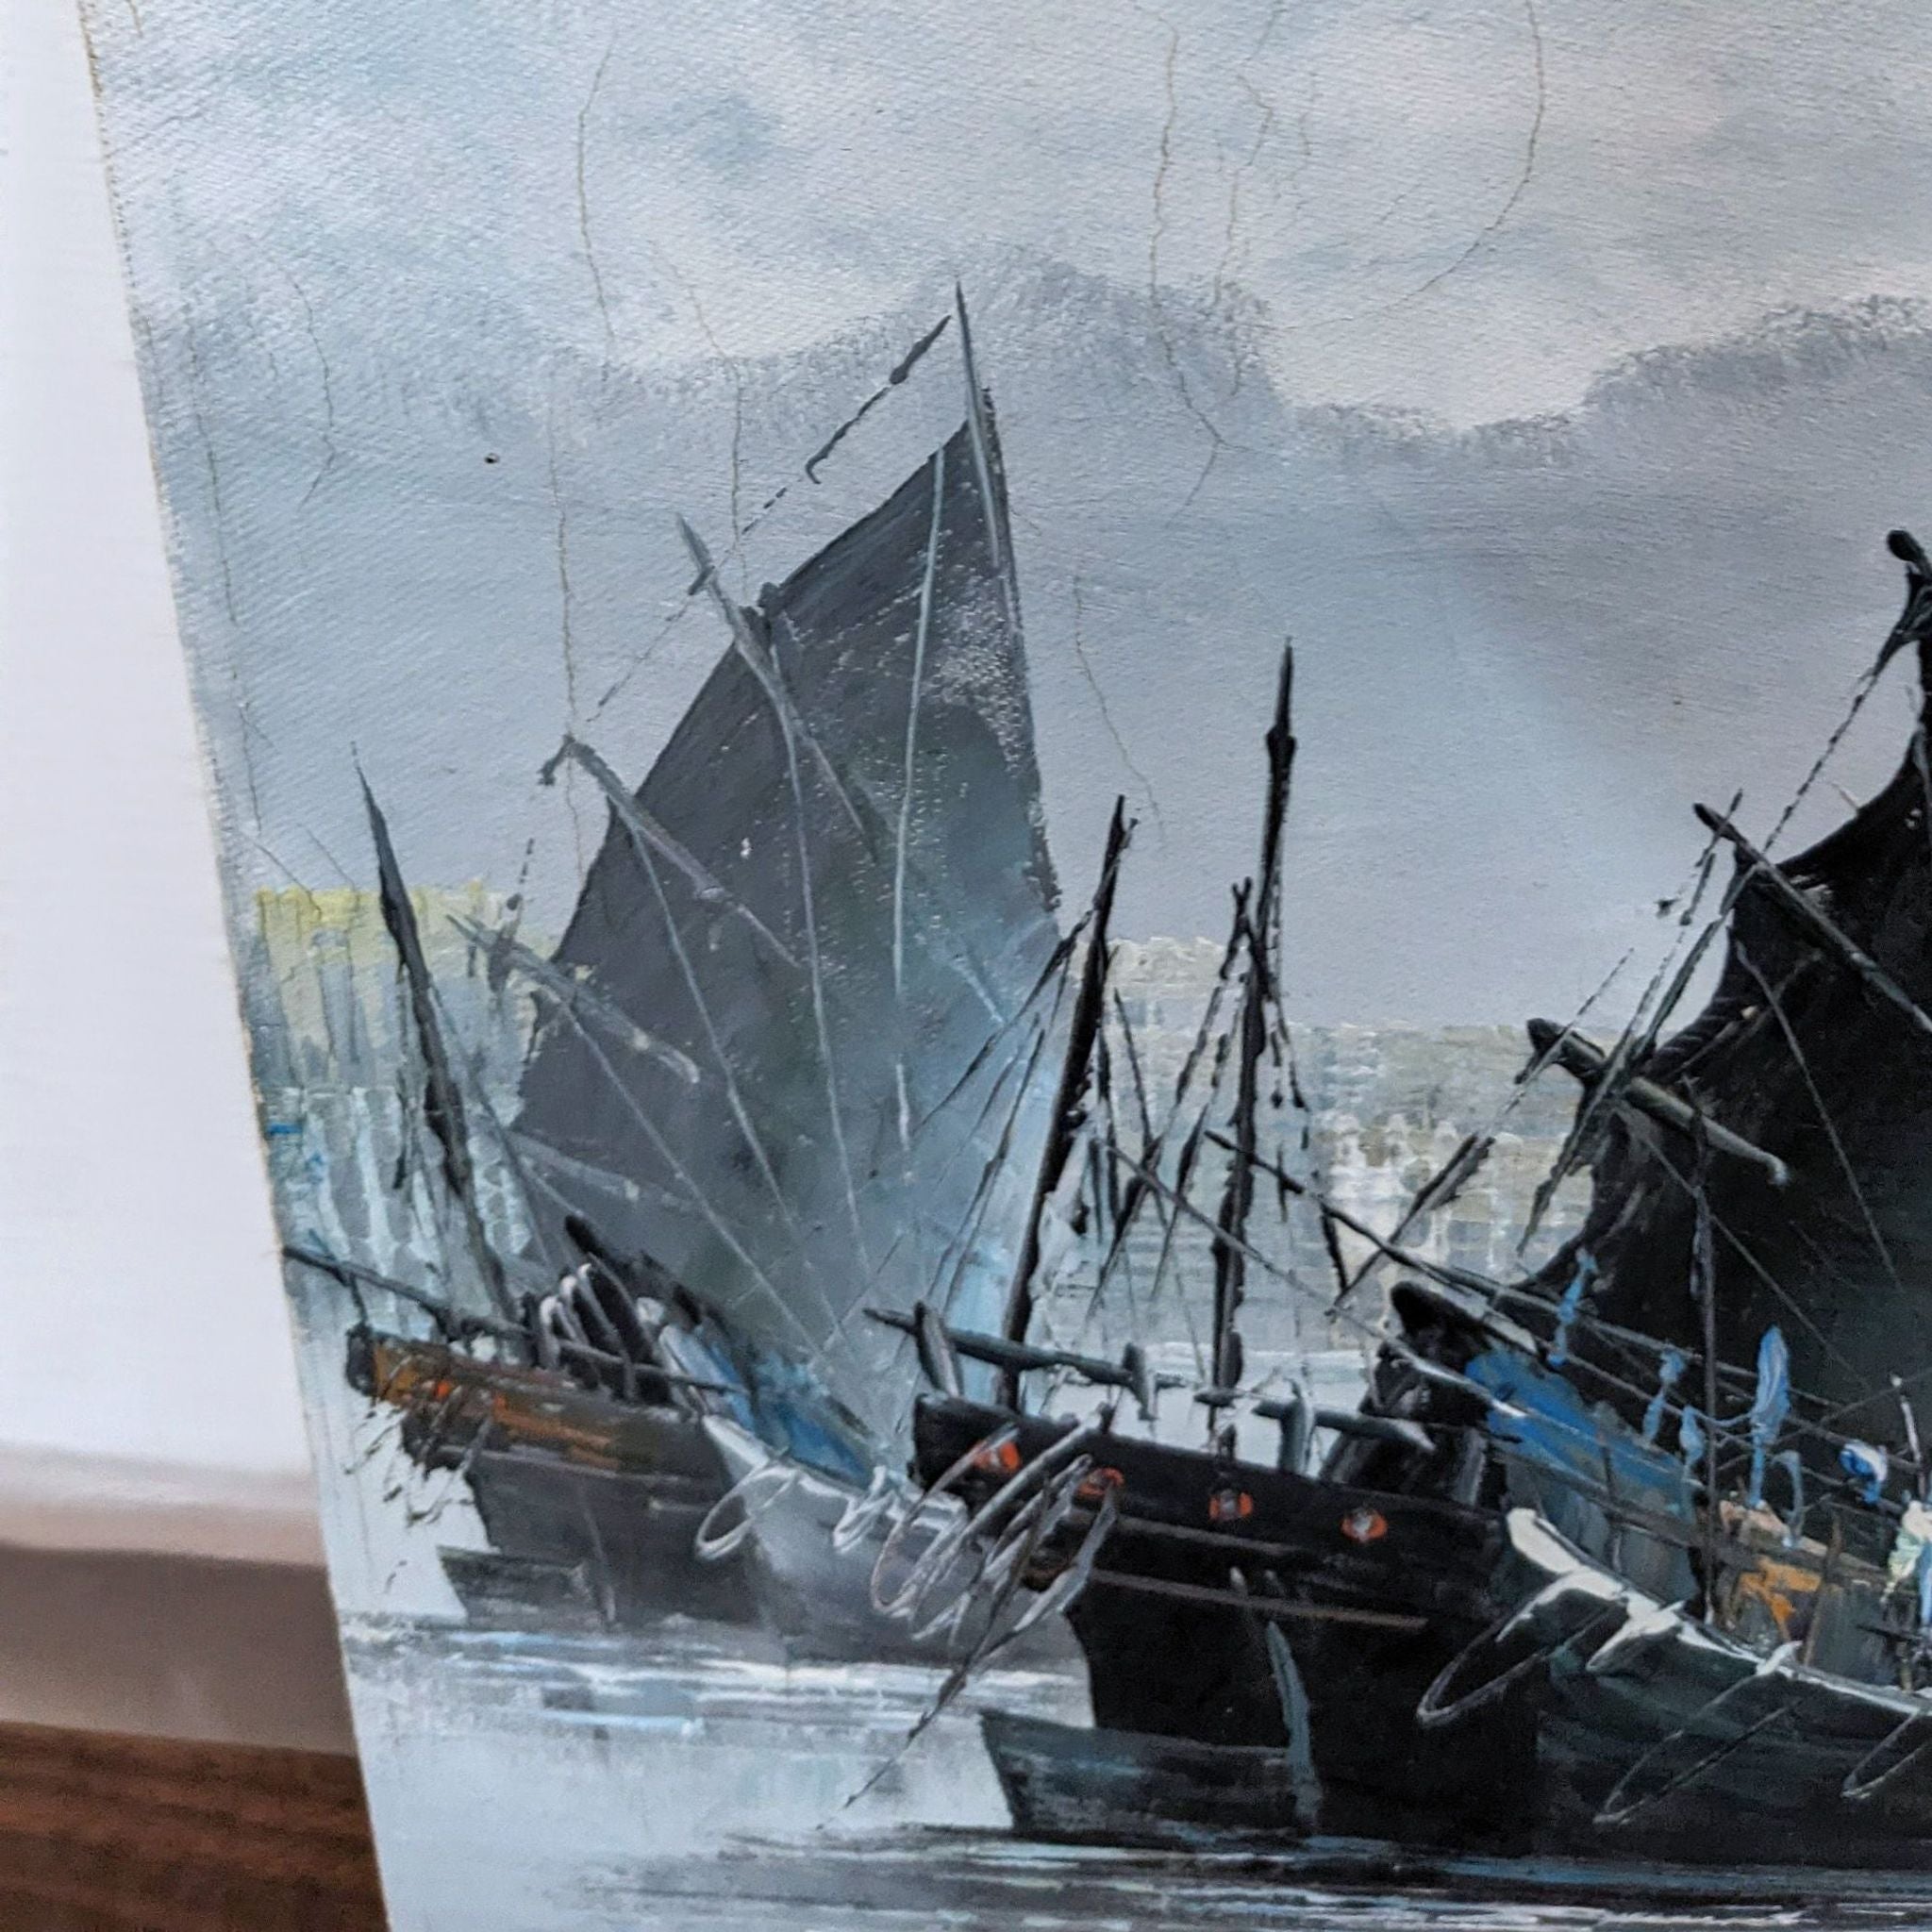 Close-up of sailboat painting showing detailed ships and signature of artist against a misty city backdrop.